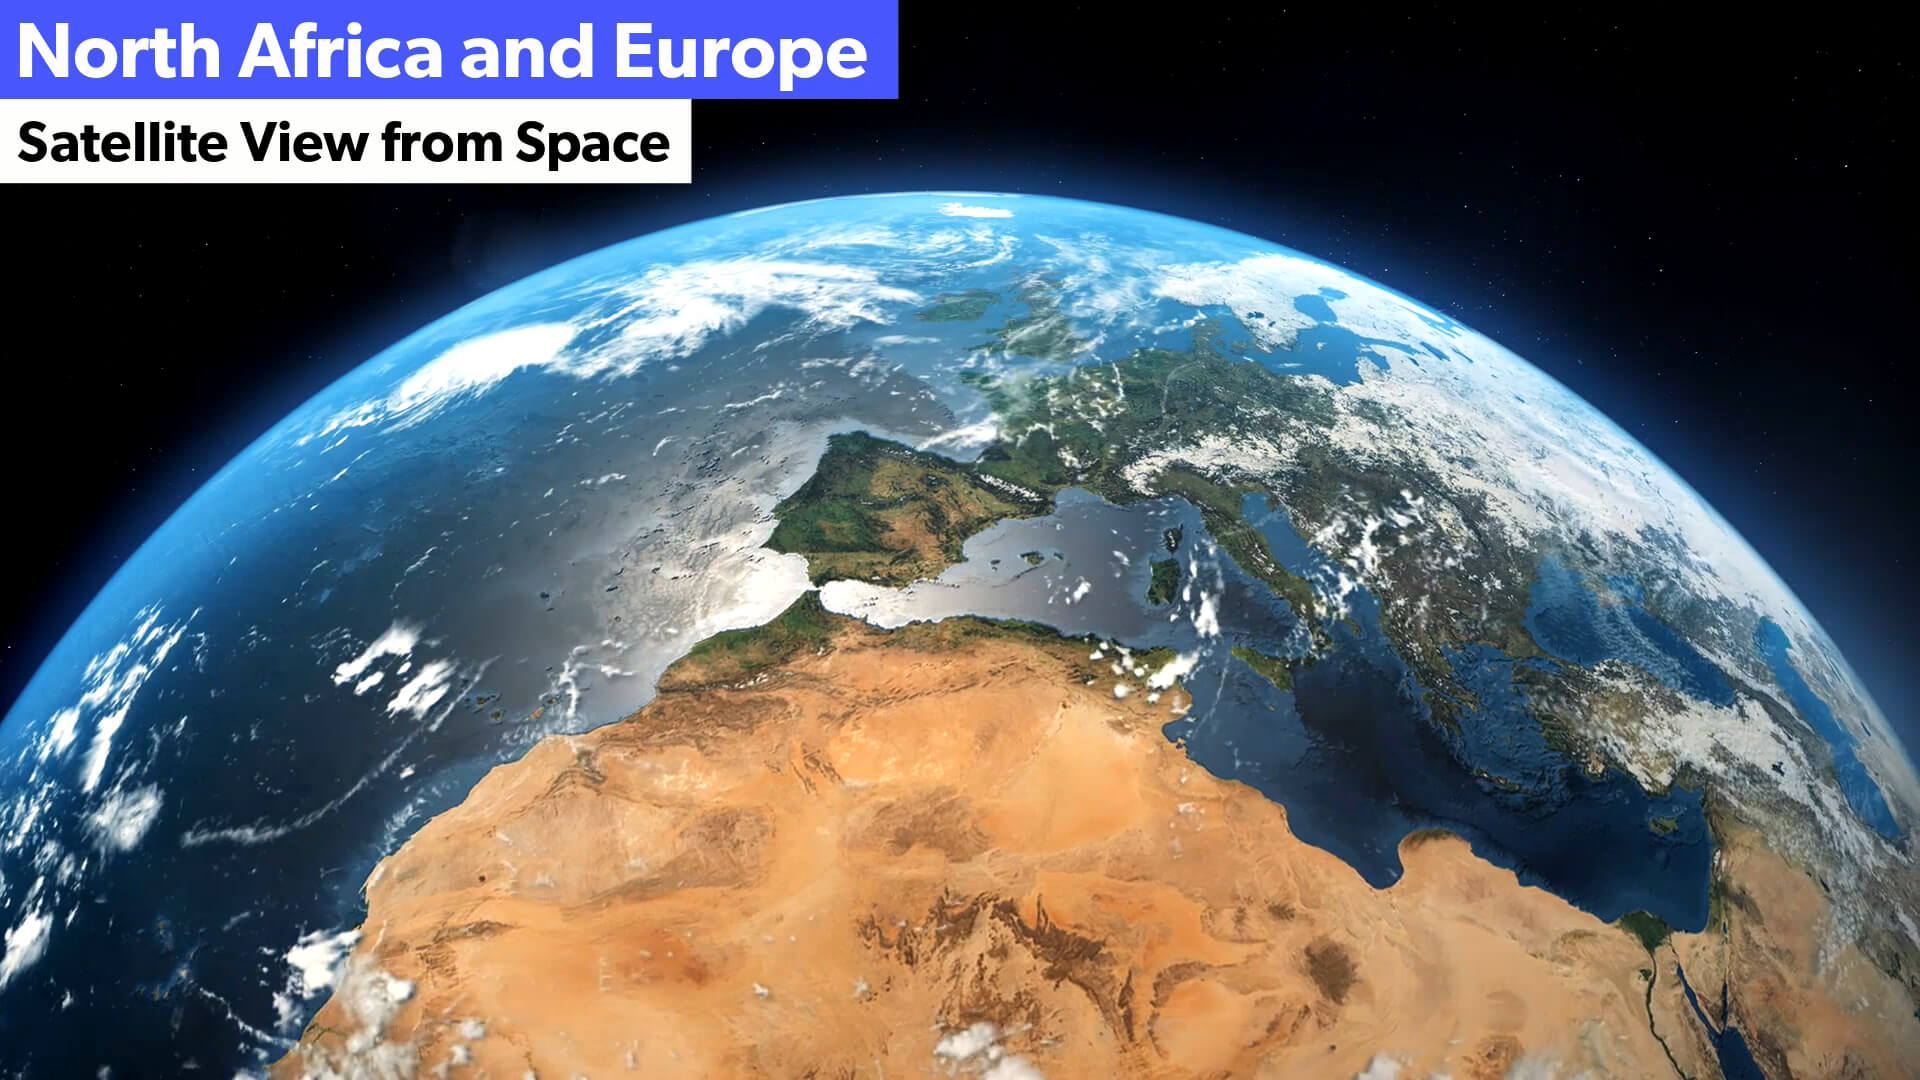 North Africa and Europe Satellite View from Space